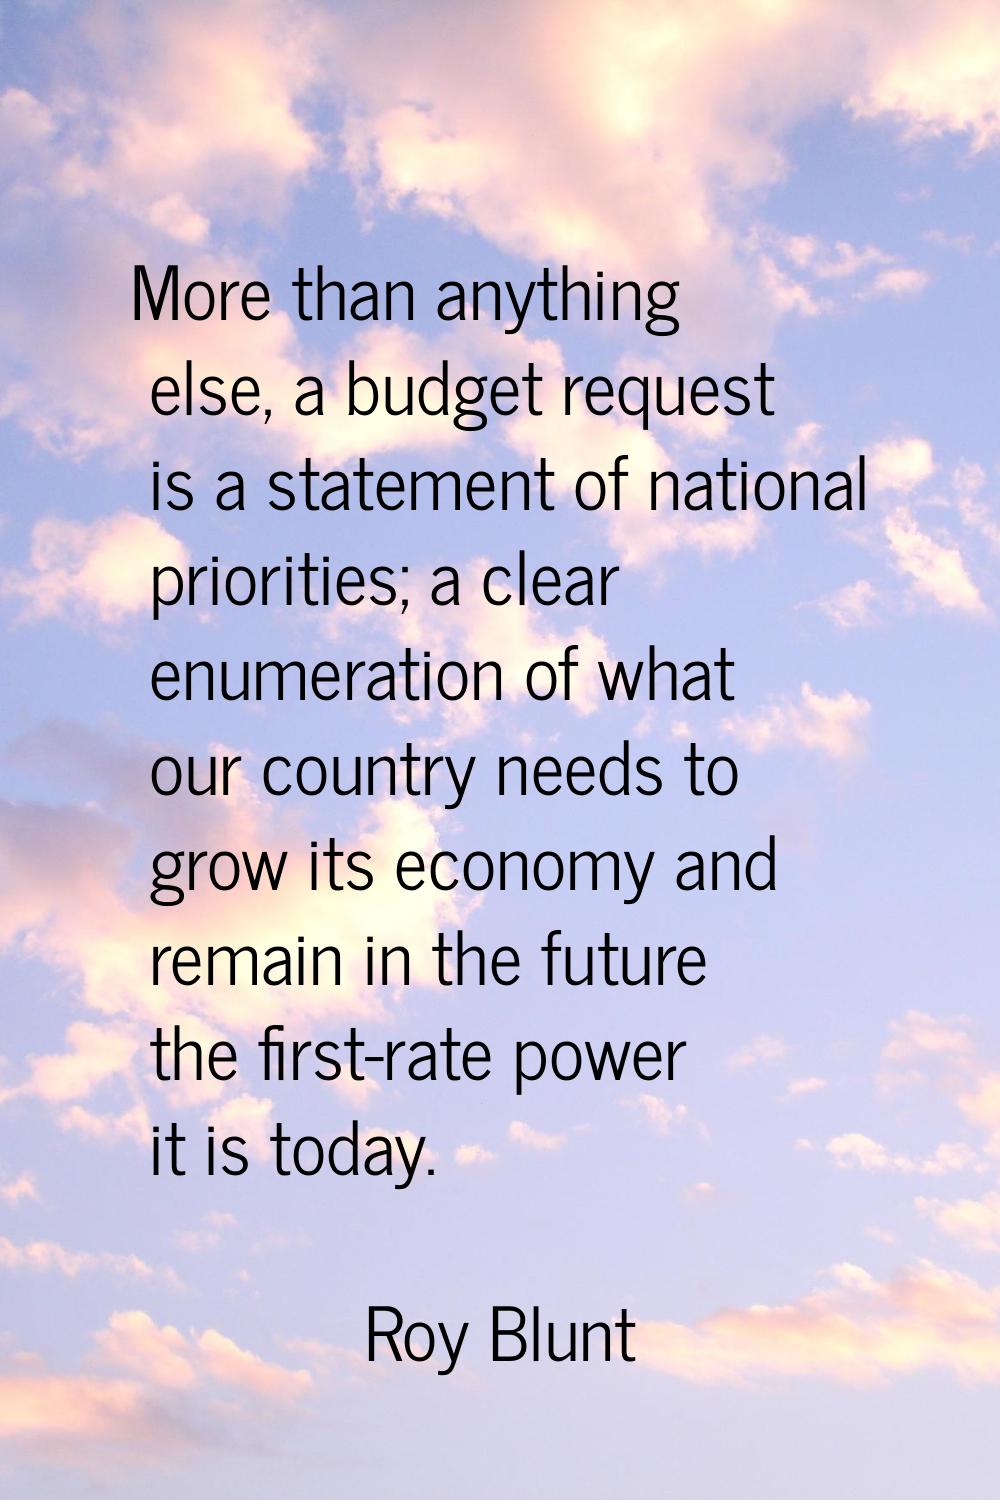 More than anything else, a budget request is a statement of national priorities; a clear enumeratio